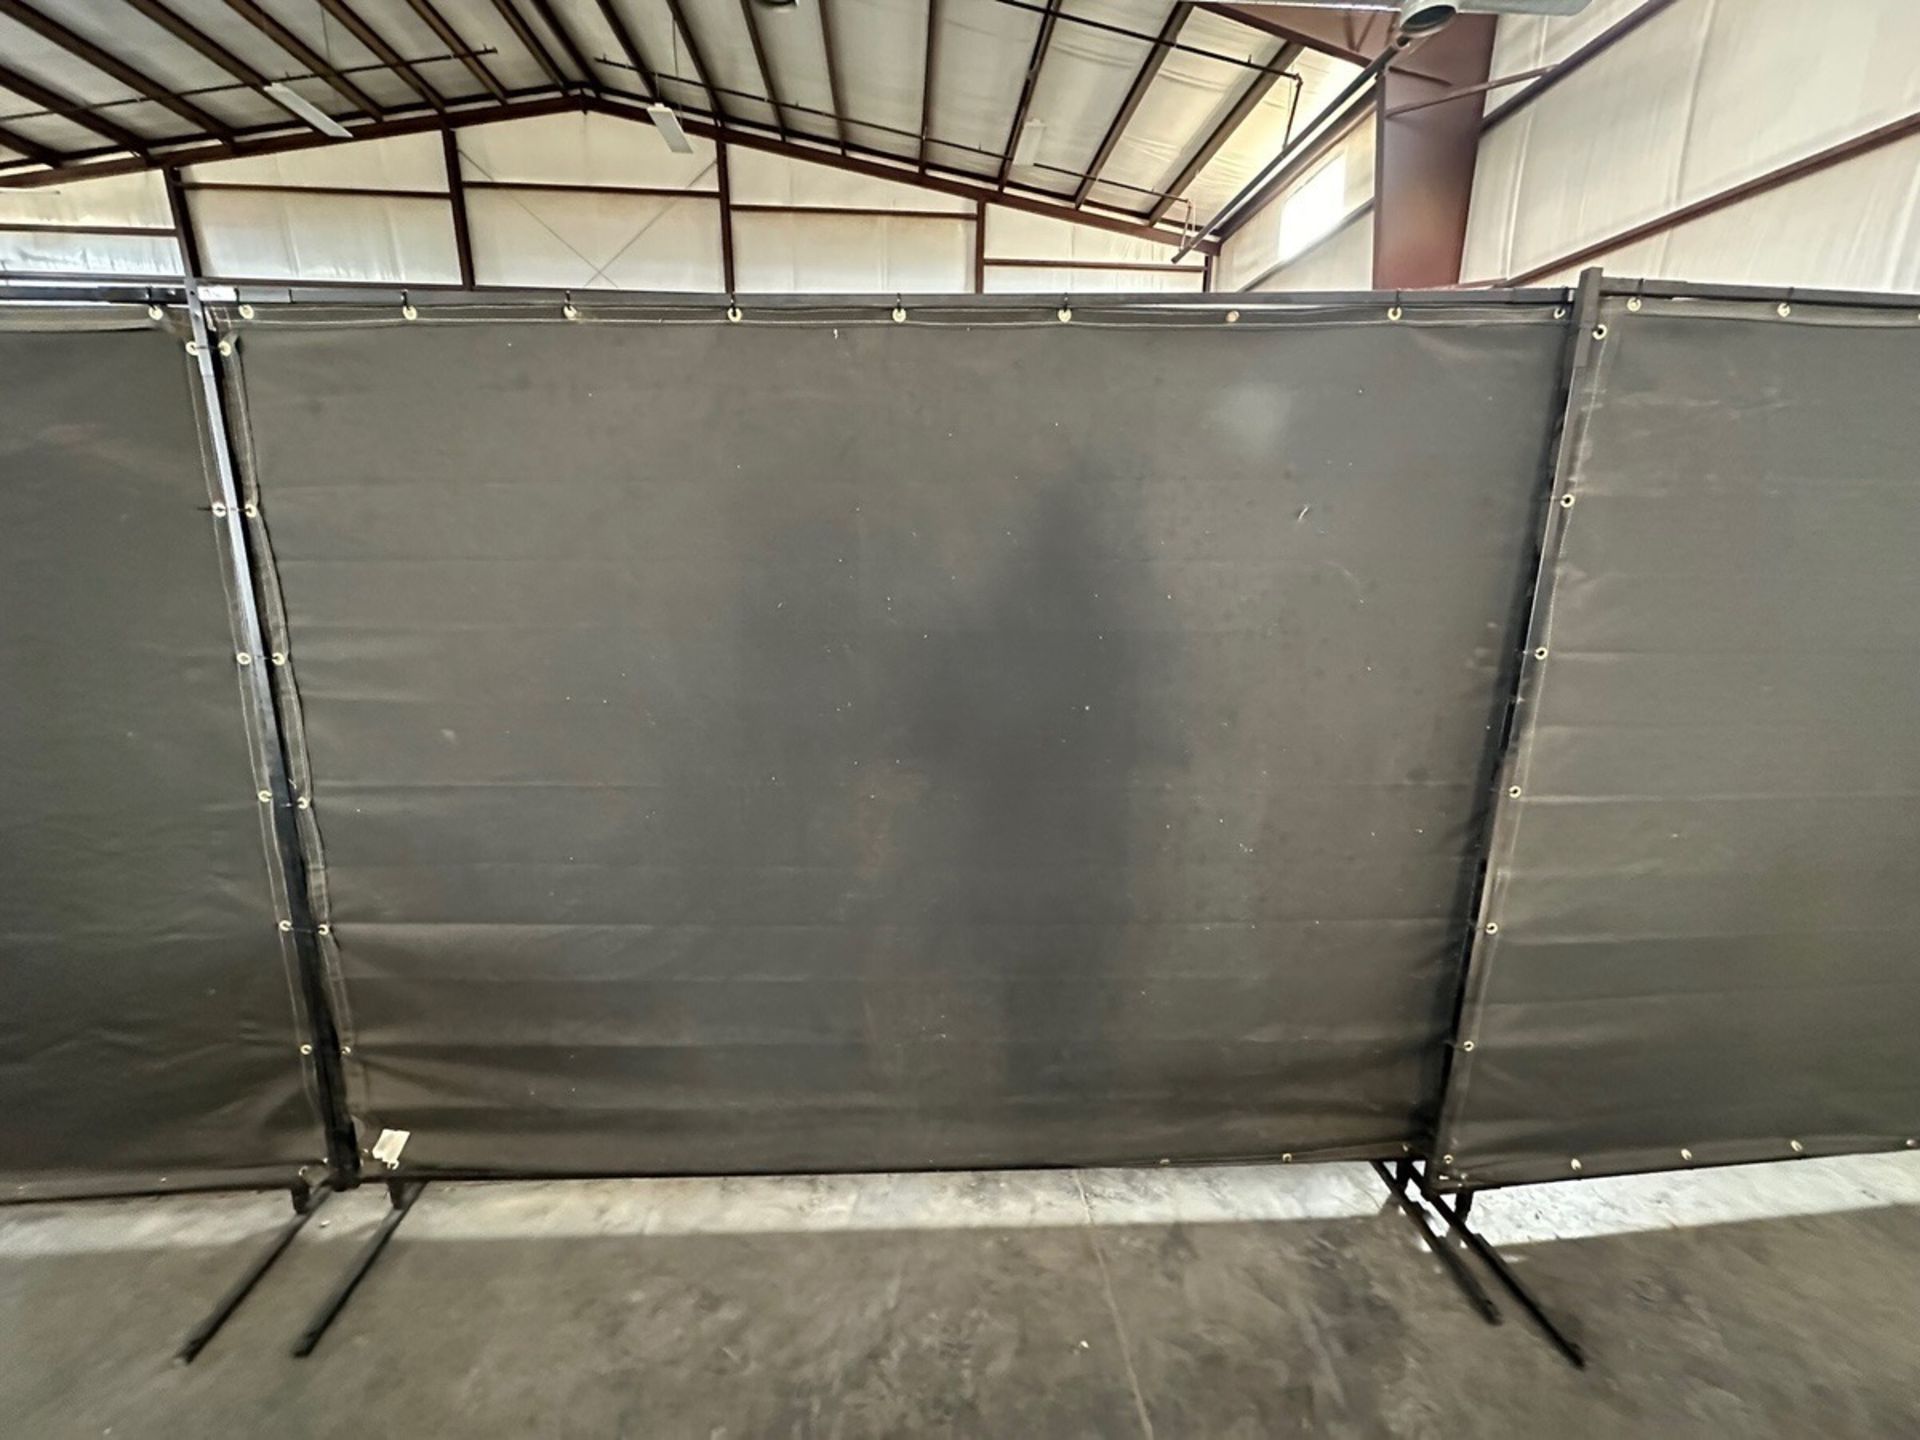 6 Welding Curtains | Rig Fee $50 - Image 4 of 6